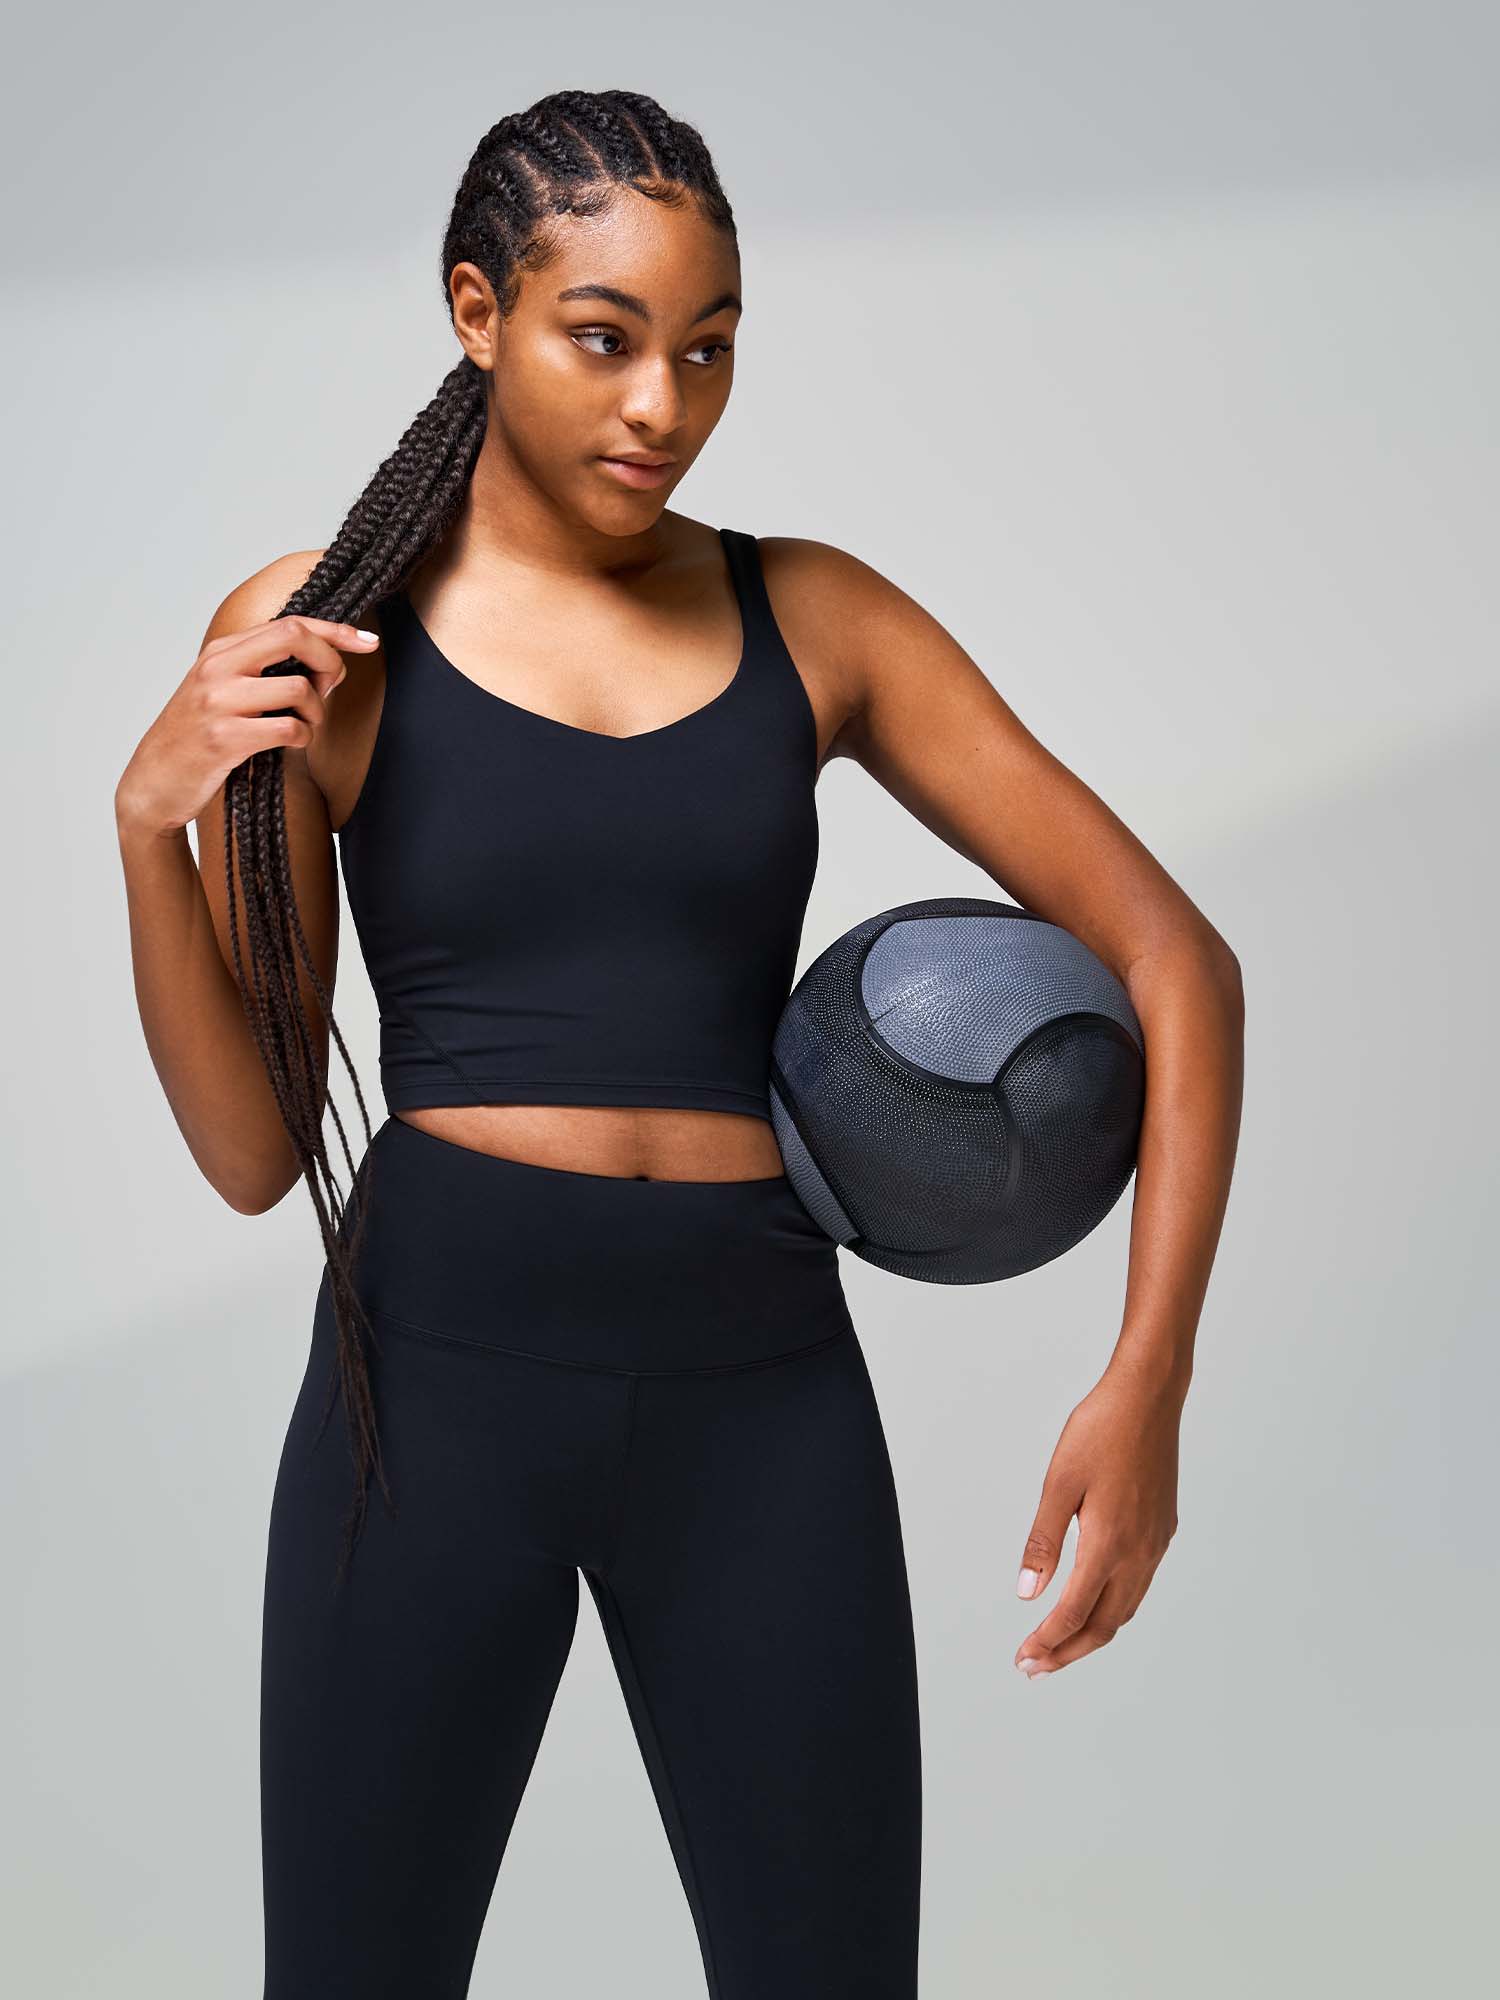 Tall woman wearing a black athletic tanktop and leggings holding a medicine ball